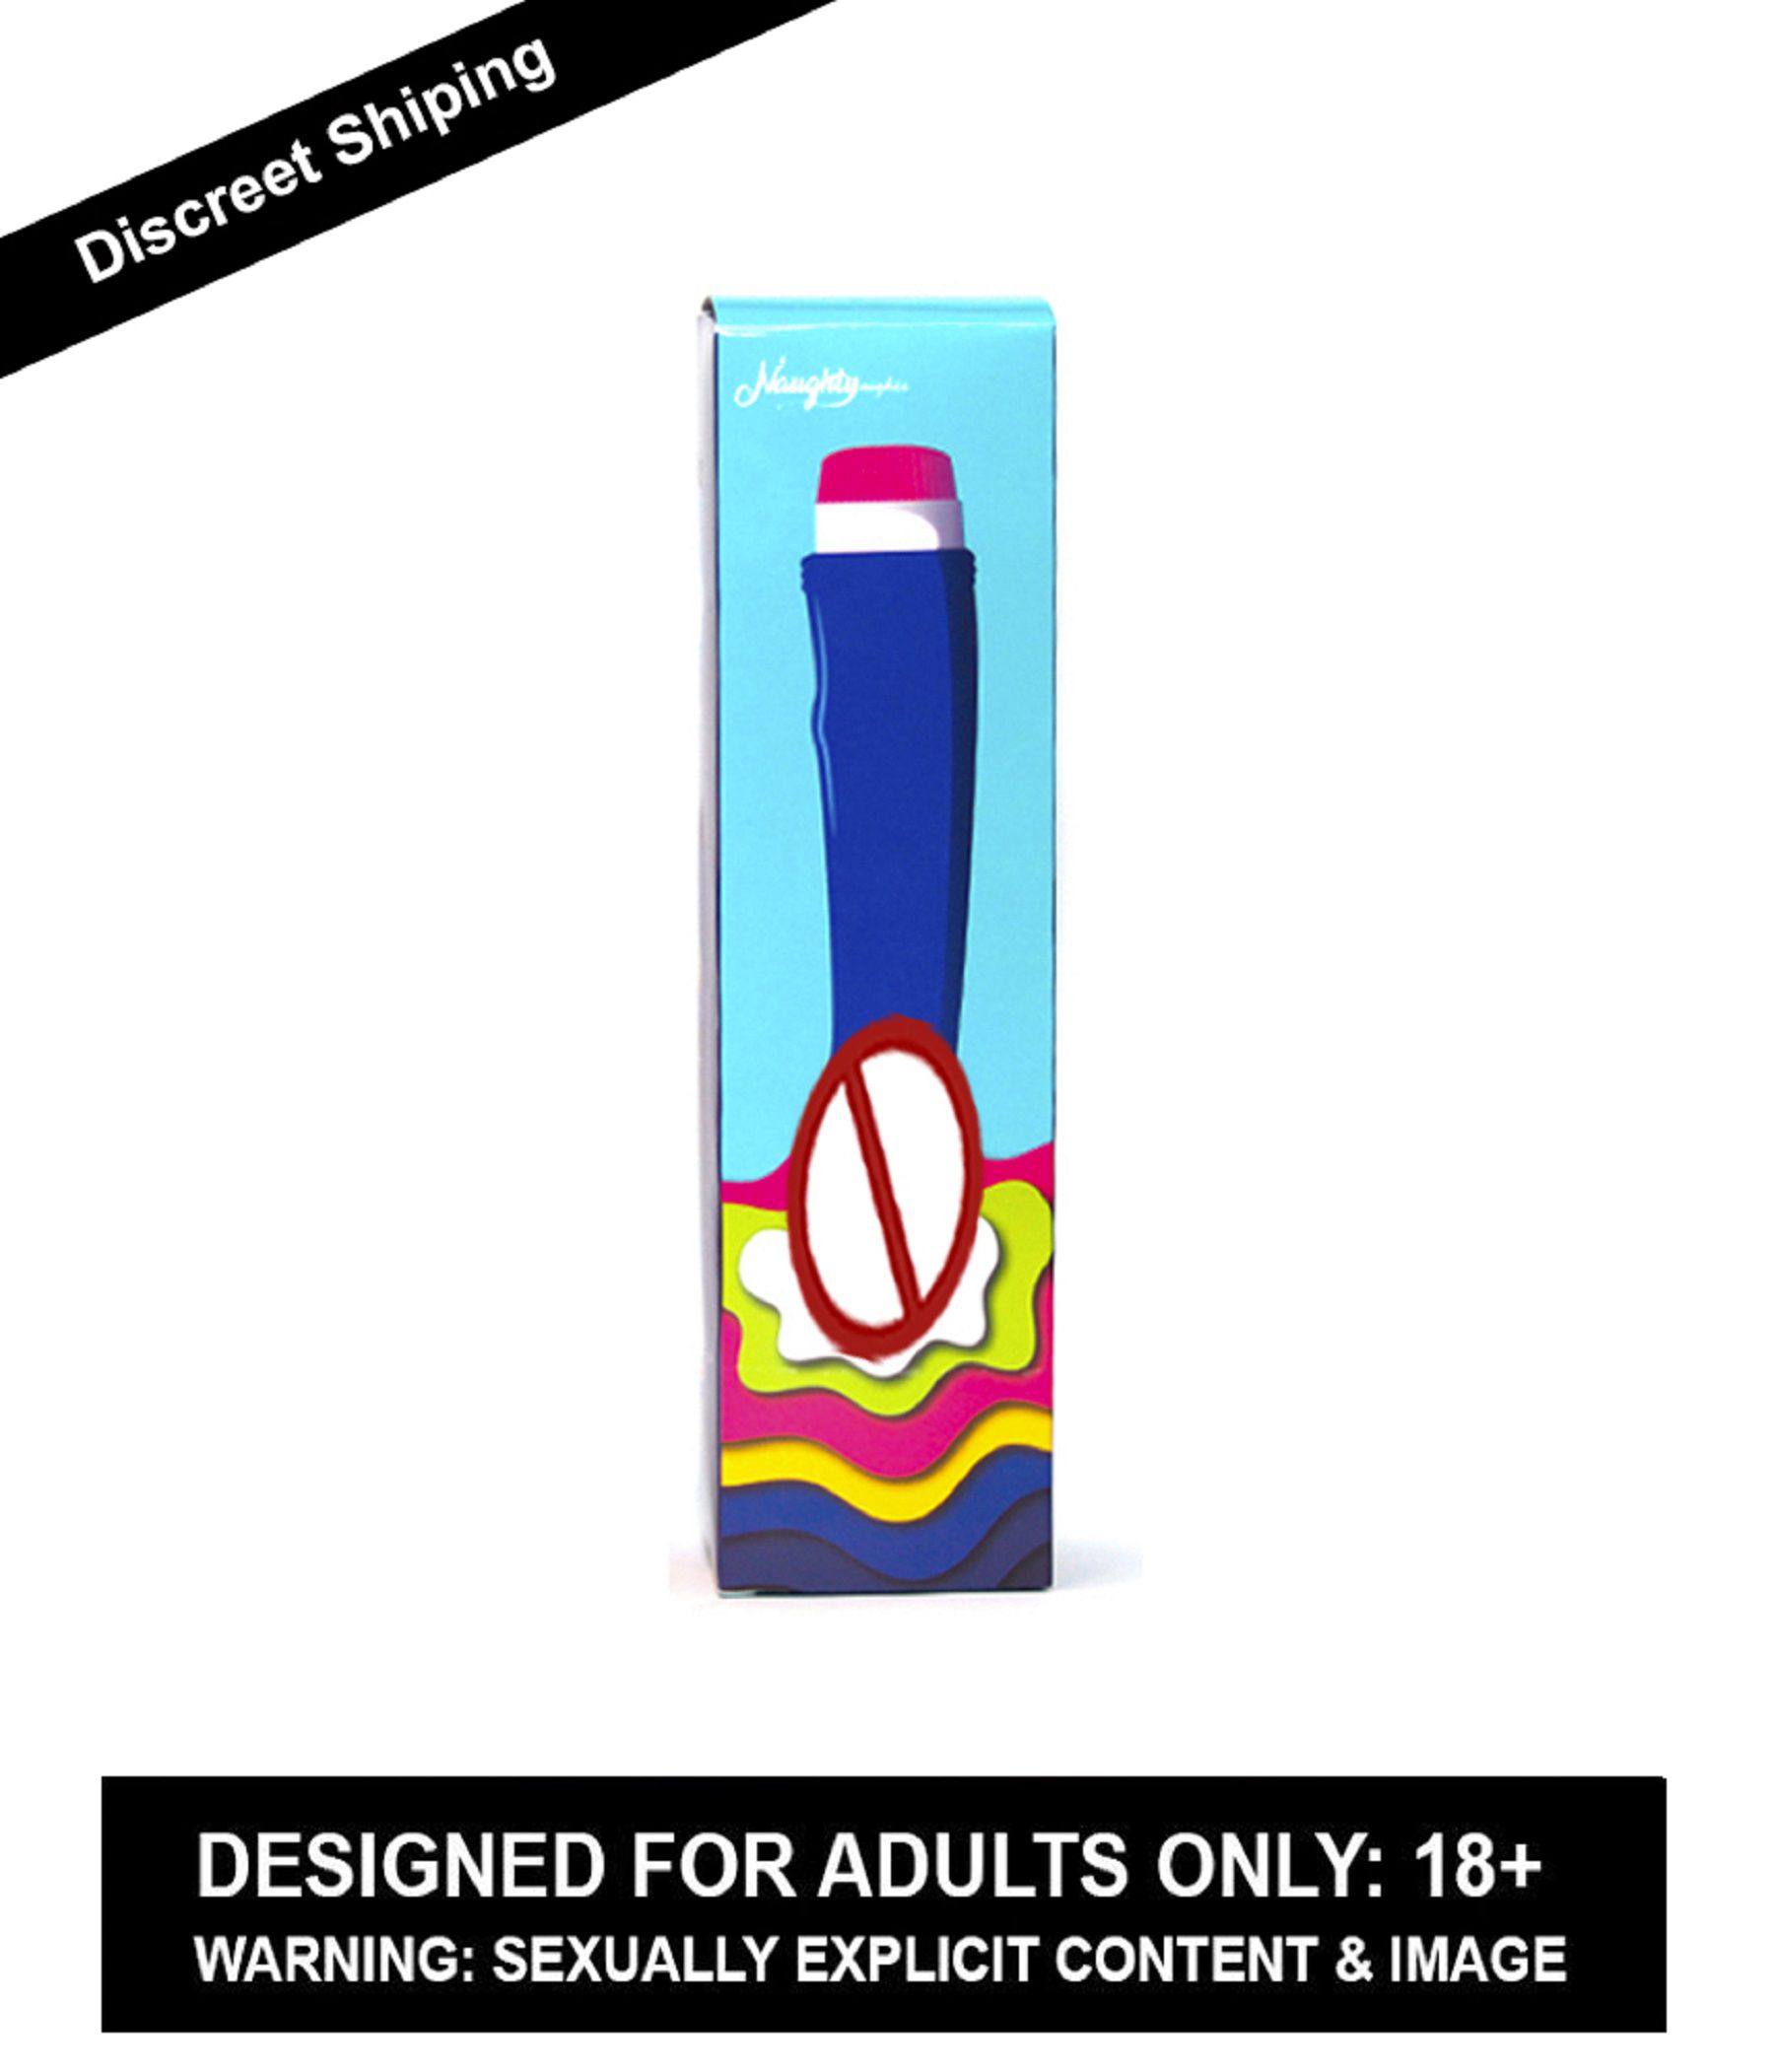 Buy Dragons 9 Inch Dildo 1000x Vibrator Online At Best Price In India Snapdeal